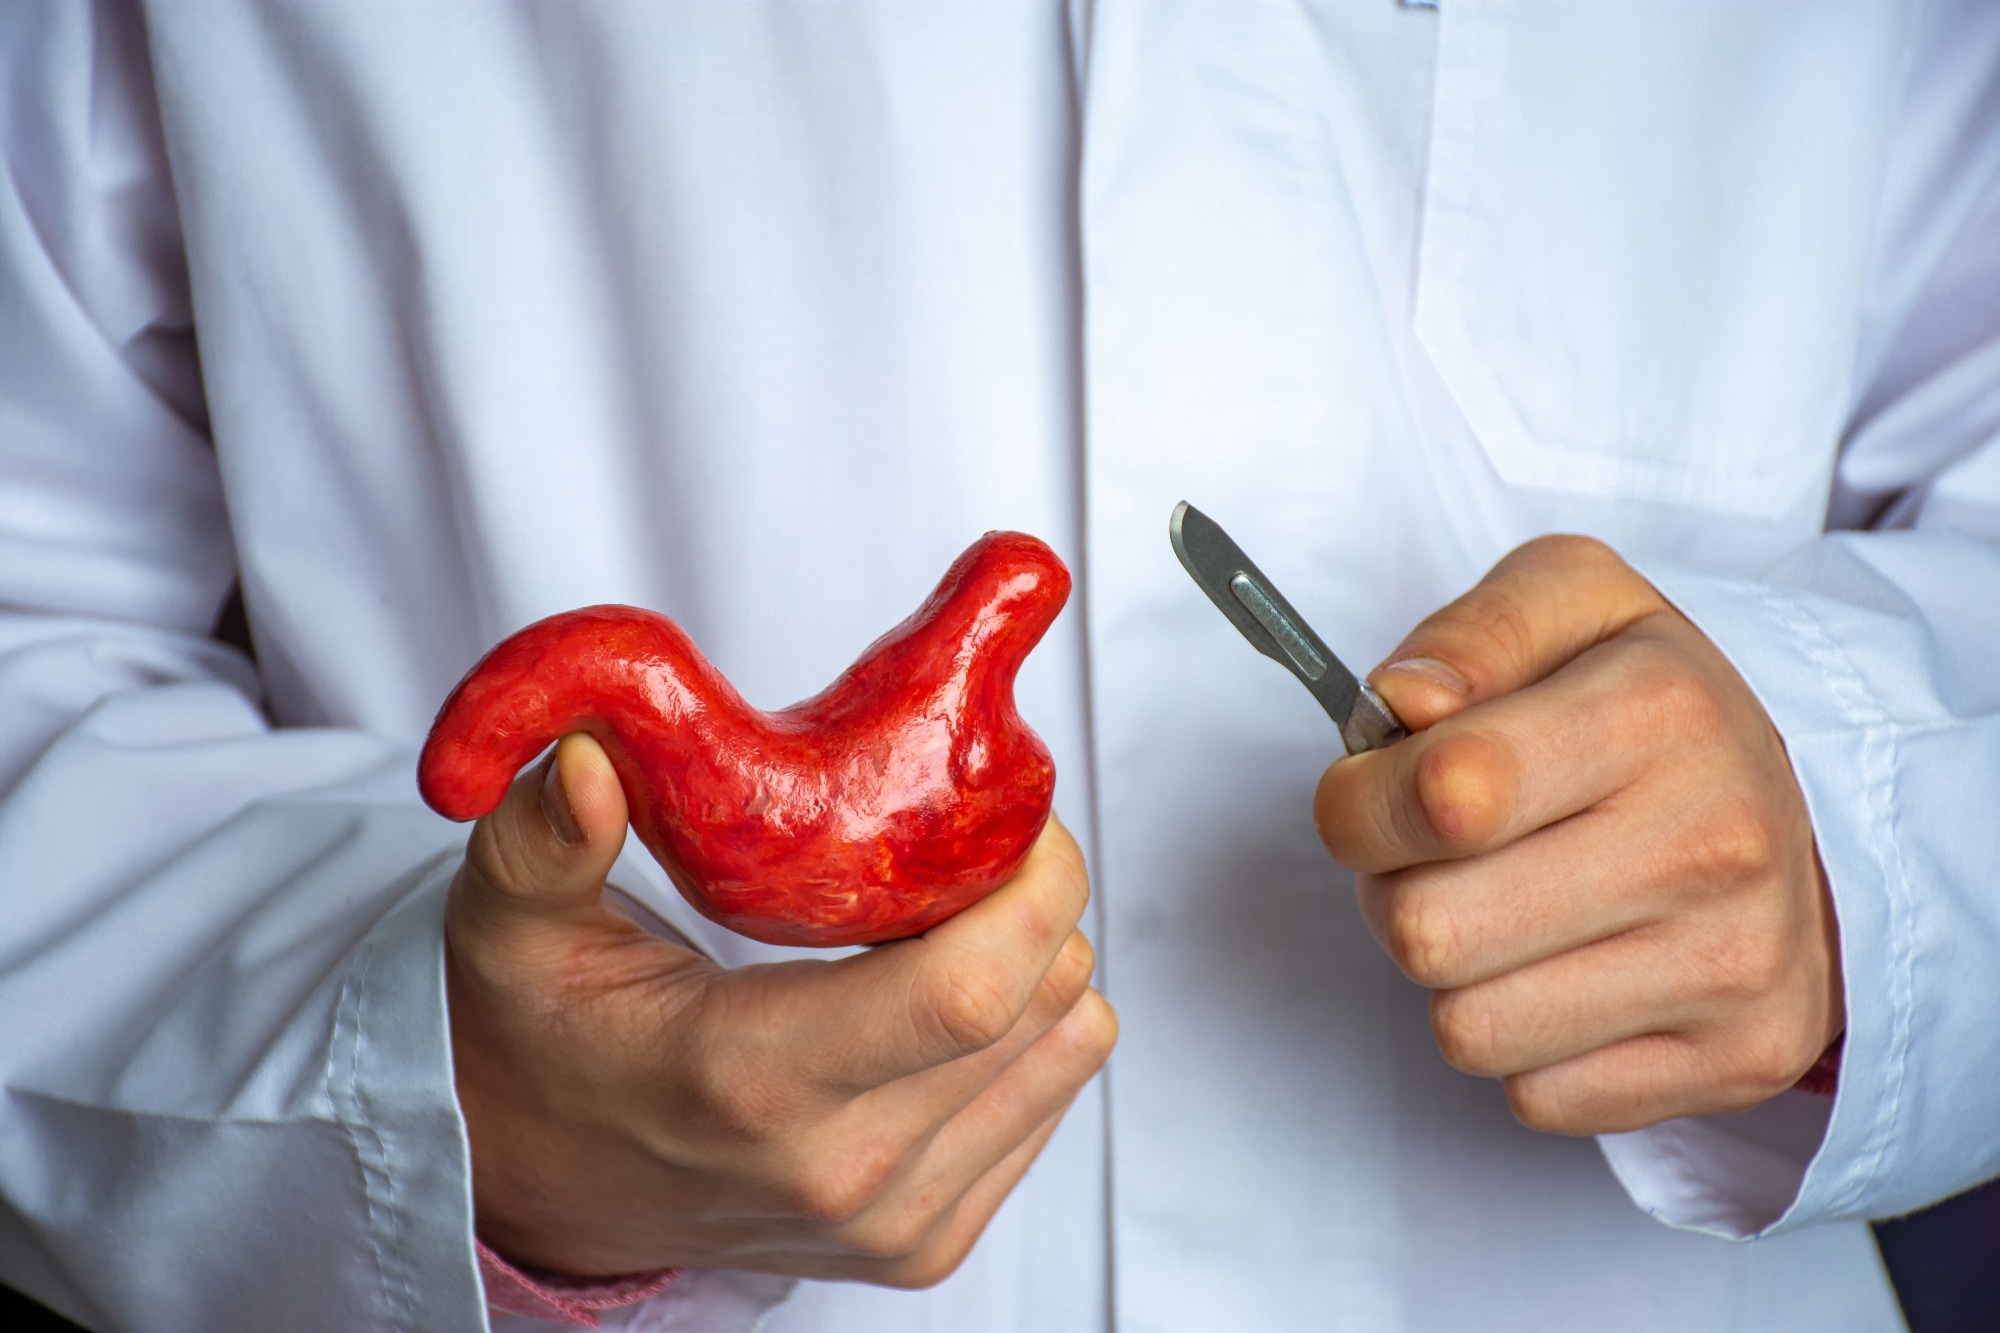 Study: Long-term effects of sleeve gastrectomy compared to Roux-en-Y gastric bypass in people with severe obesity: A multicenter, randomized, controlled phase-III trial (SleeveBypass). Image source: Shidlovski/Shutterstock.com